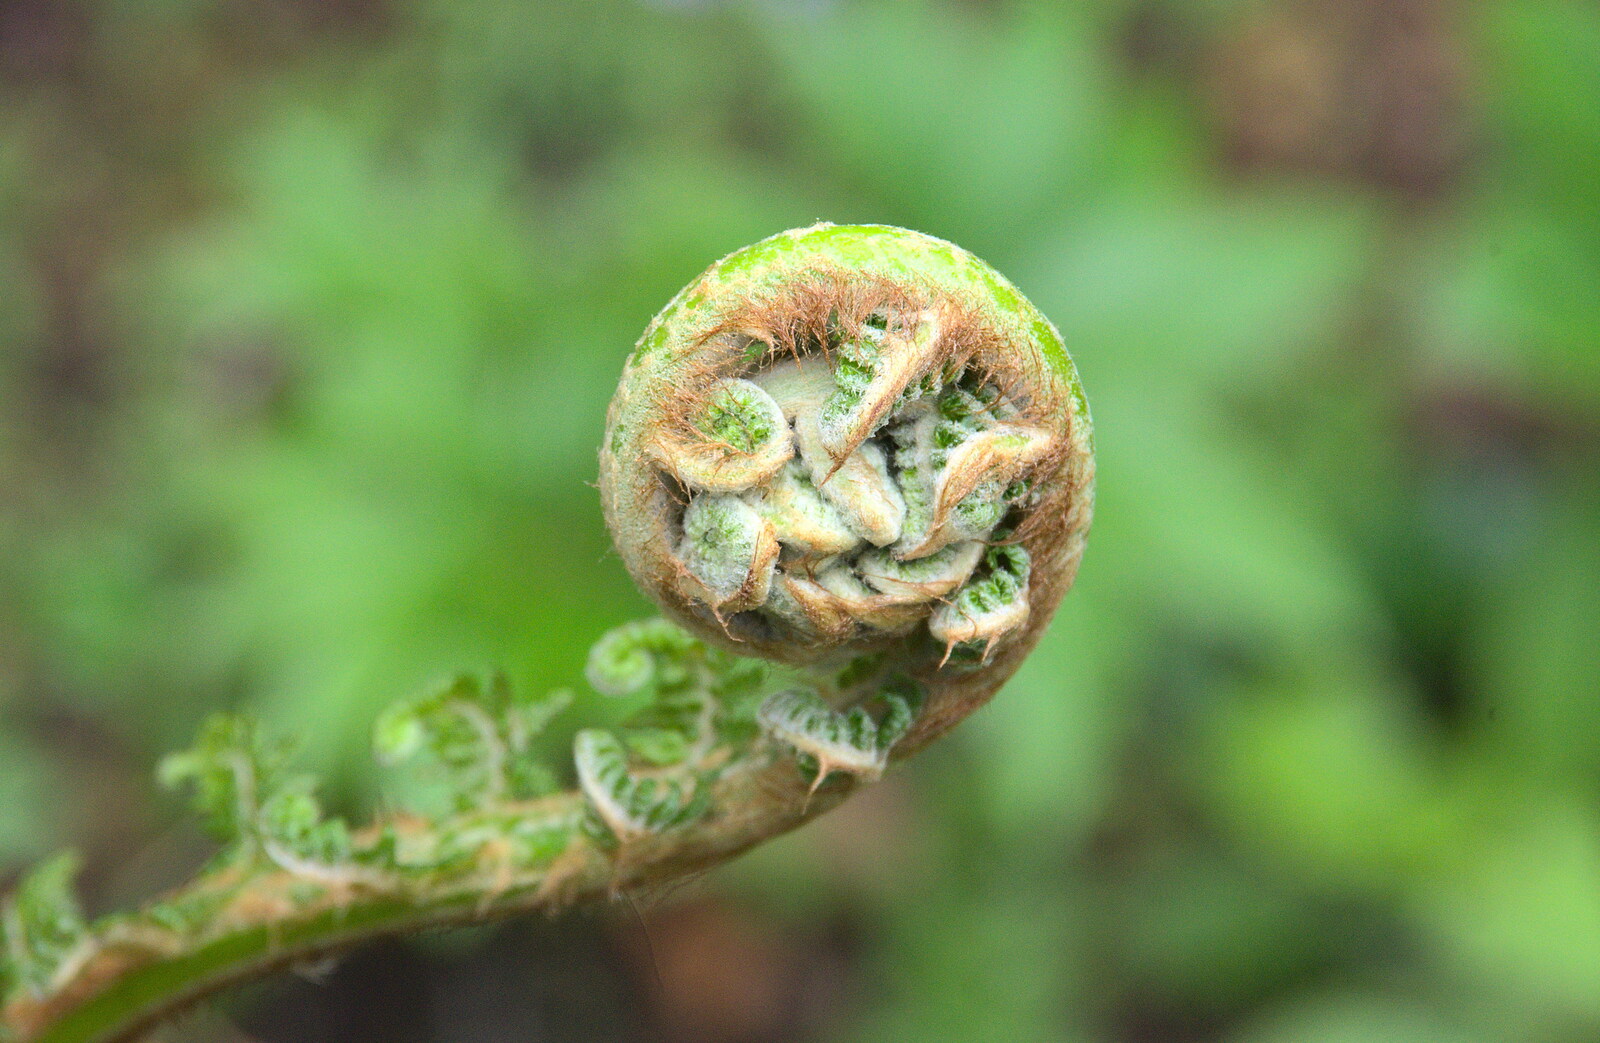 A fern opens up from A Trip to Blickling Hall, Aylsham, Norfolk - 29th April 2018